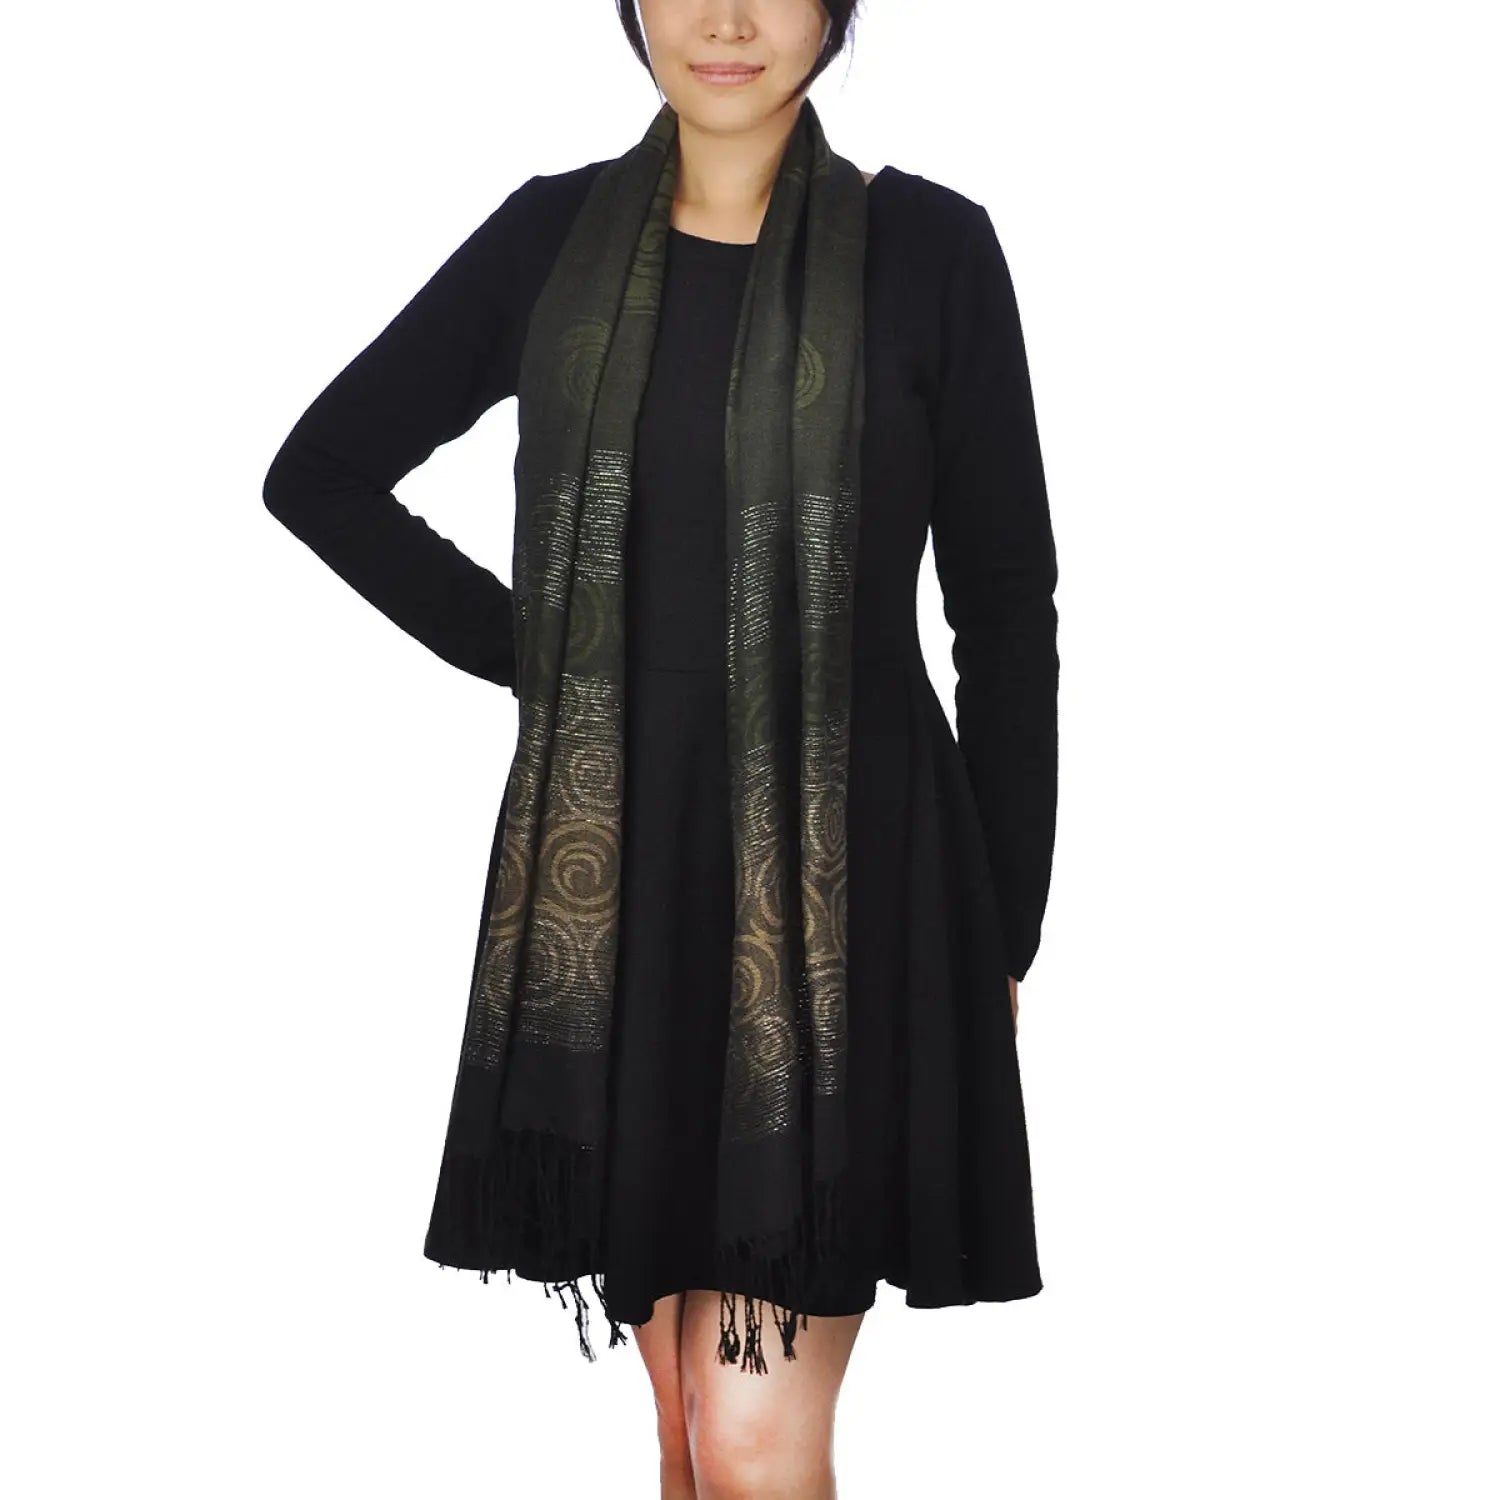 Woman wearing black scarf and dress, Glittery Two-Tone Ombre Tasselled Scarf Shawl.